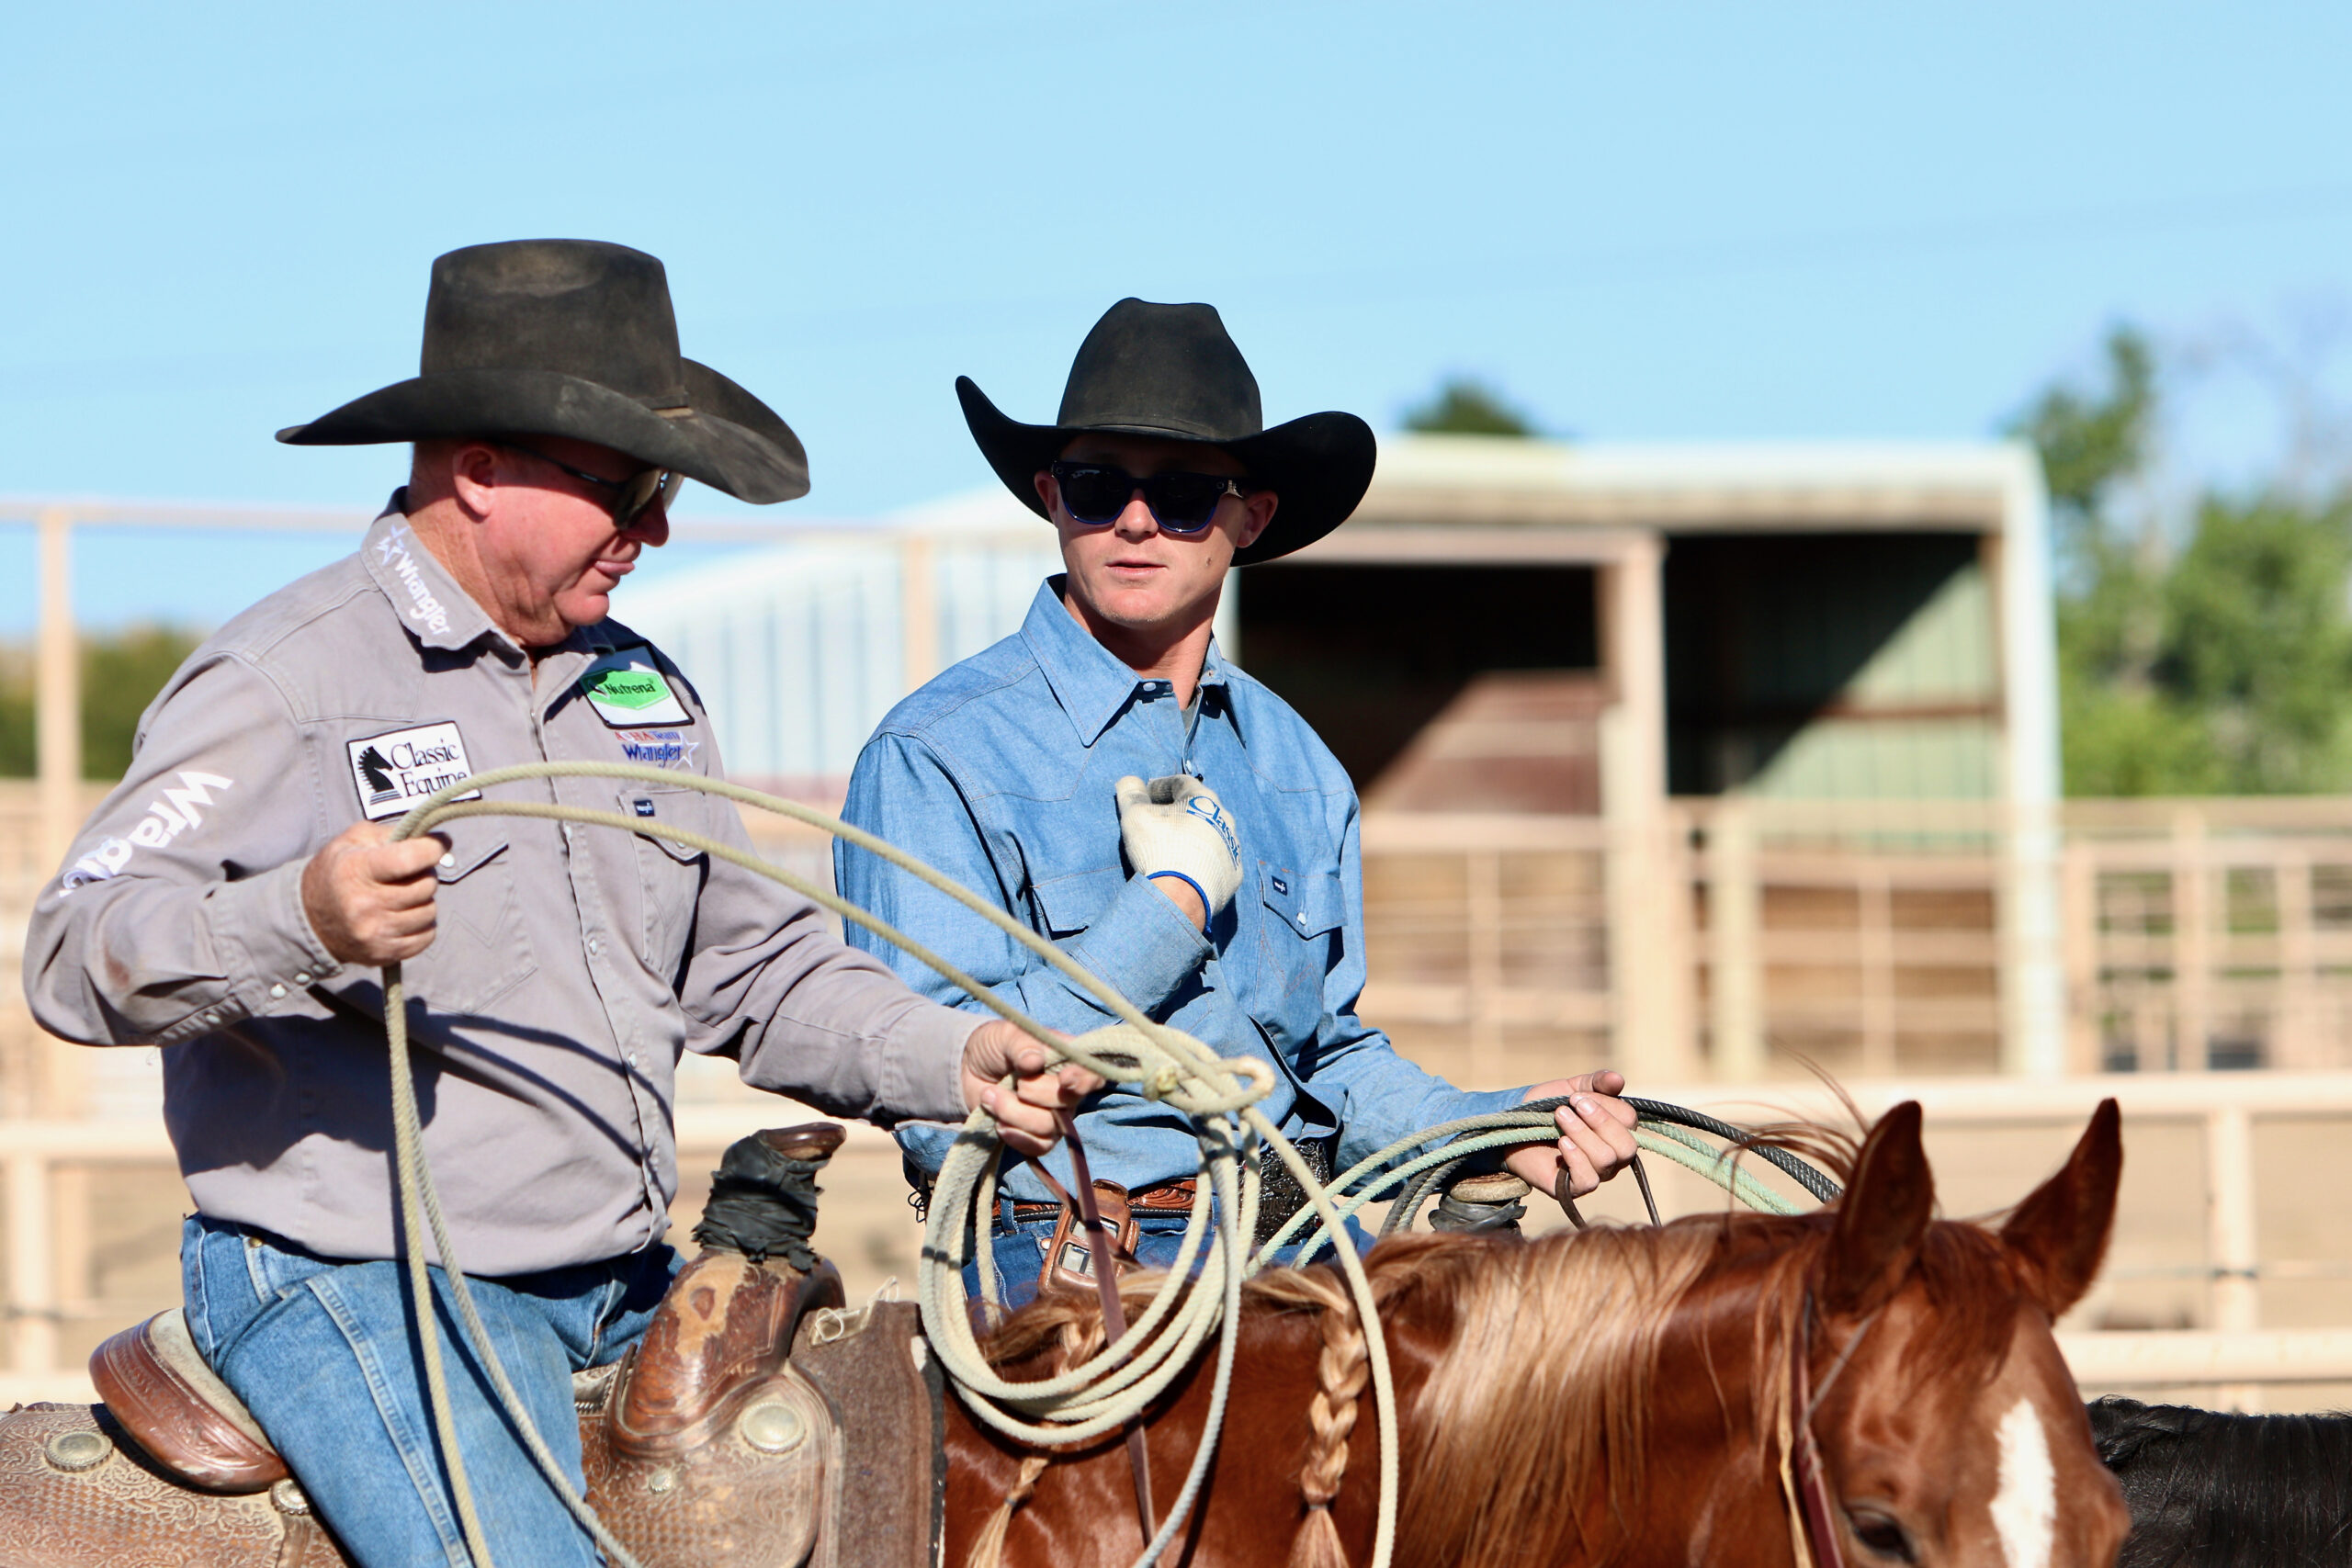 New Roping.com Series with 3 Generations of Yates NFR Ropers